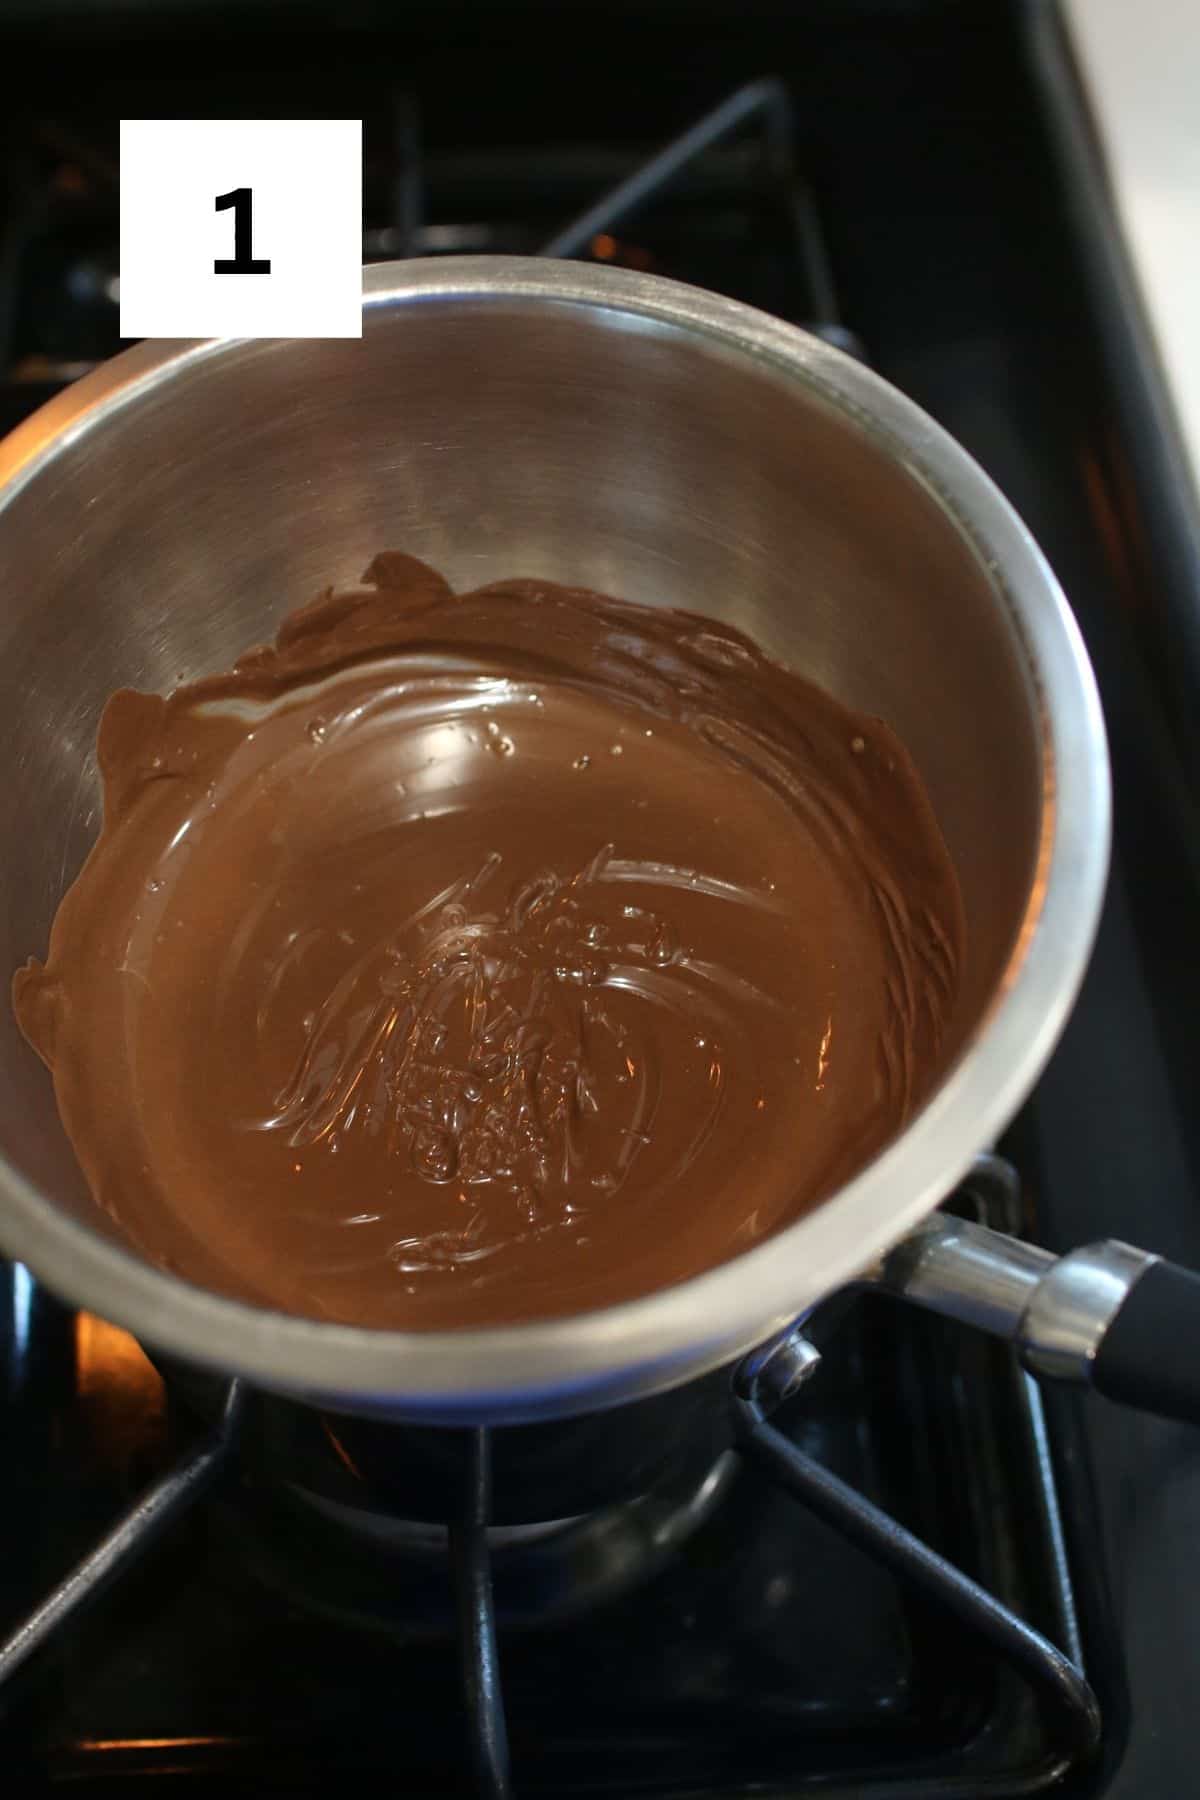 A small metal bowl set up on a double broiler on the stove with melted chocolate. In the upper left corner is a black square with a white '1' in the center.